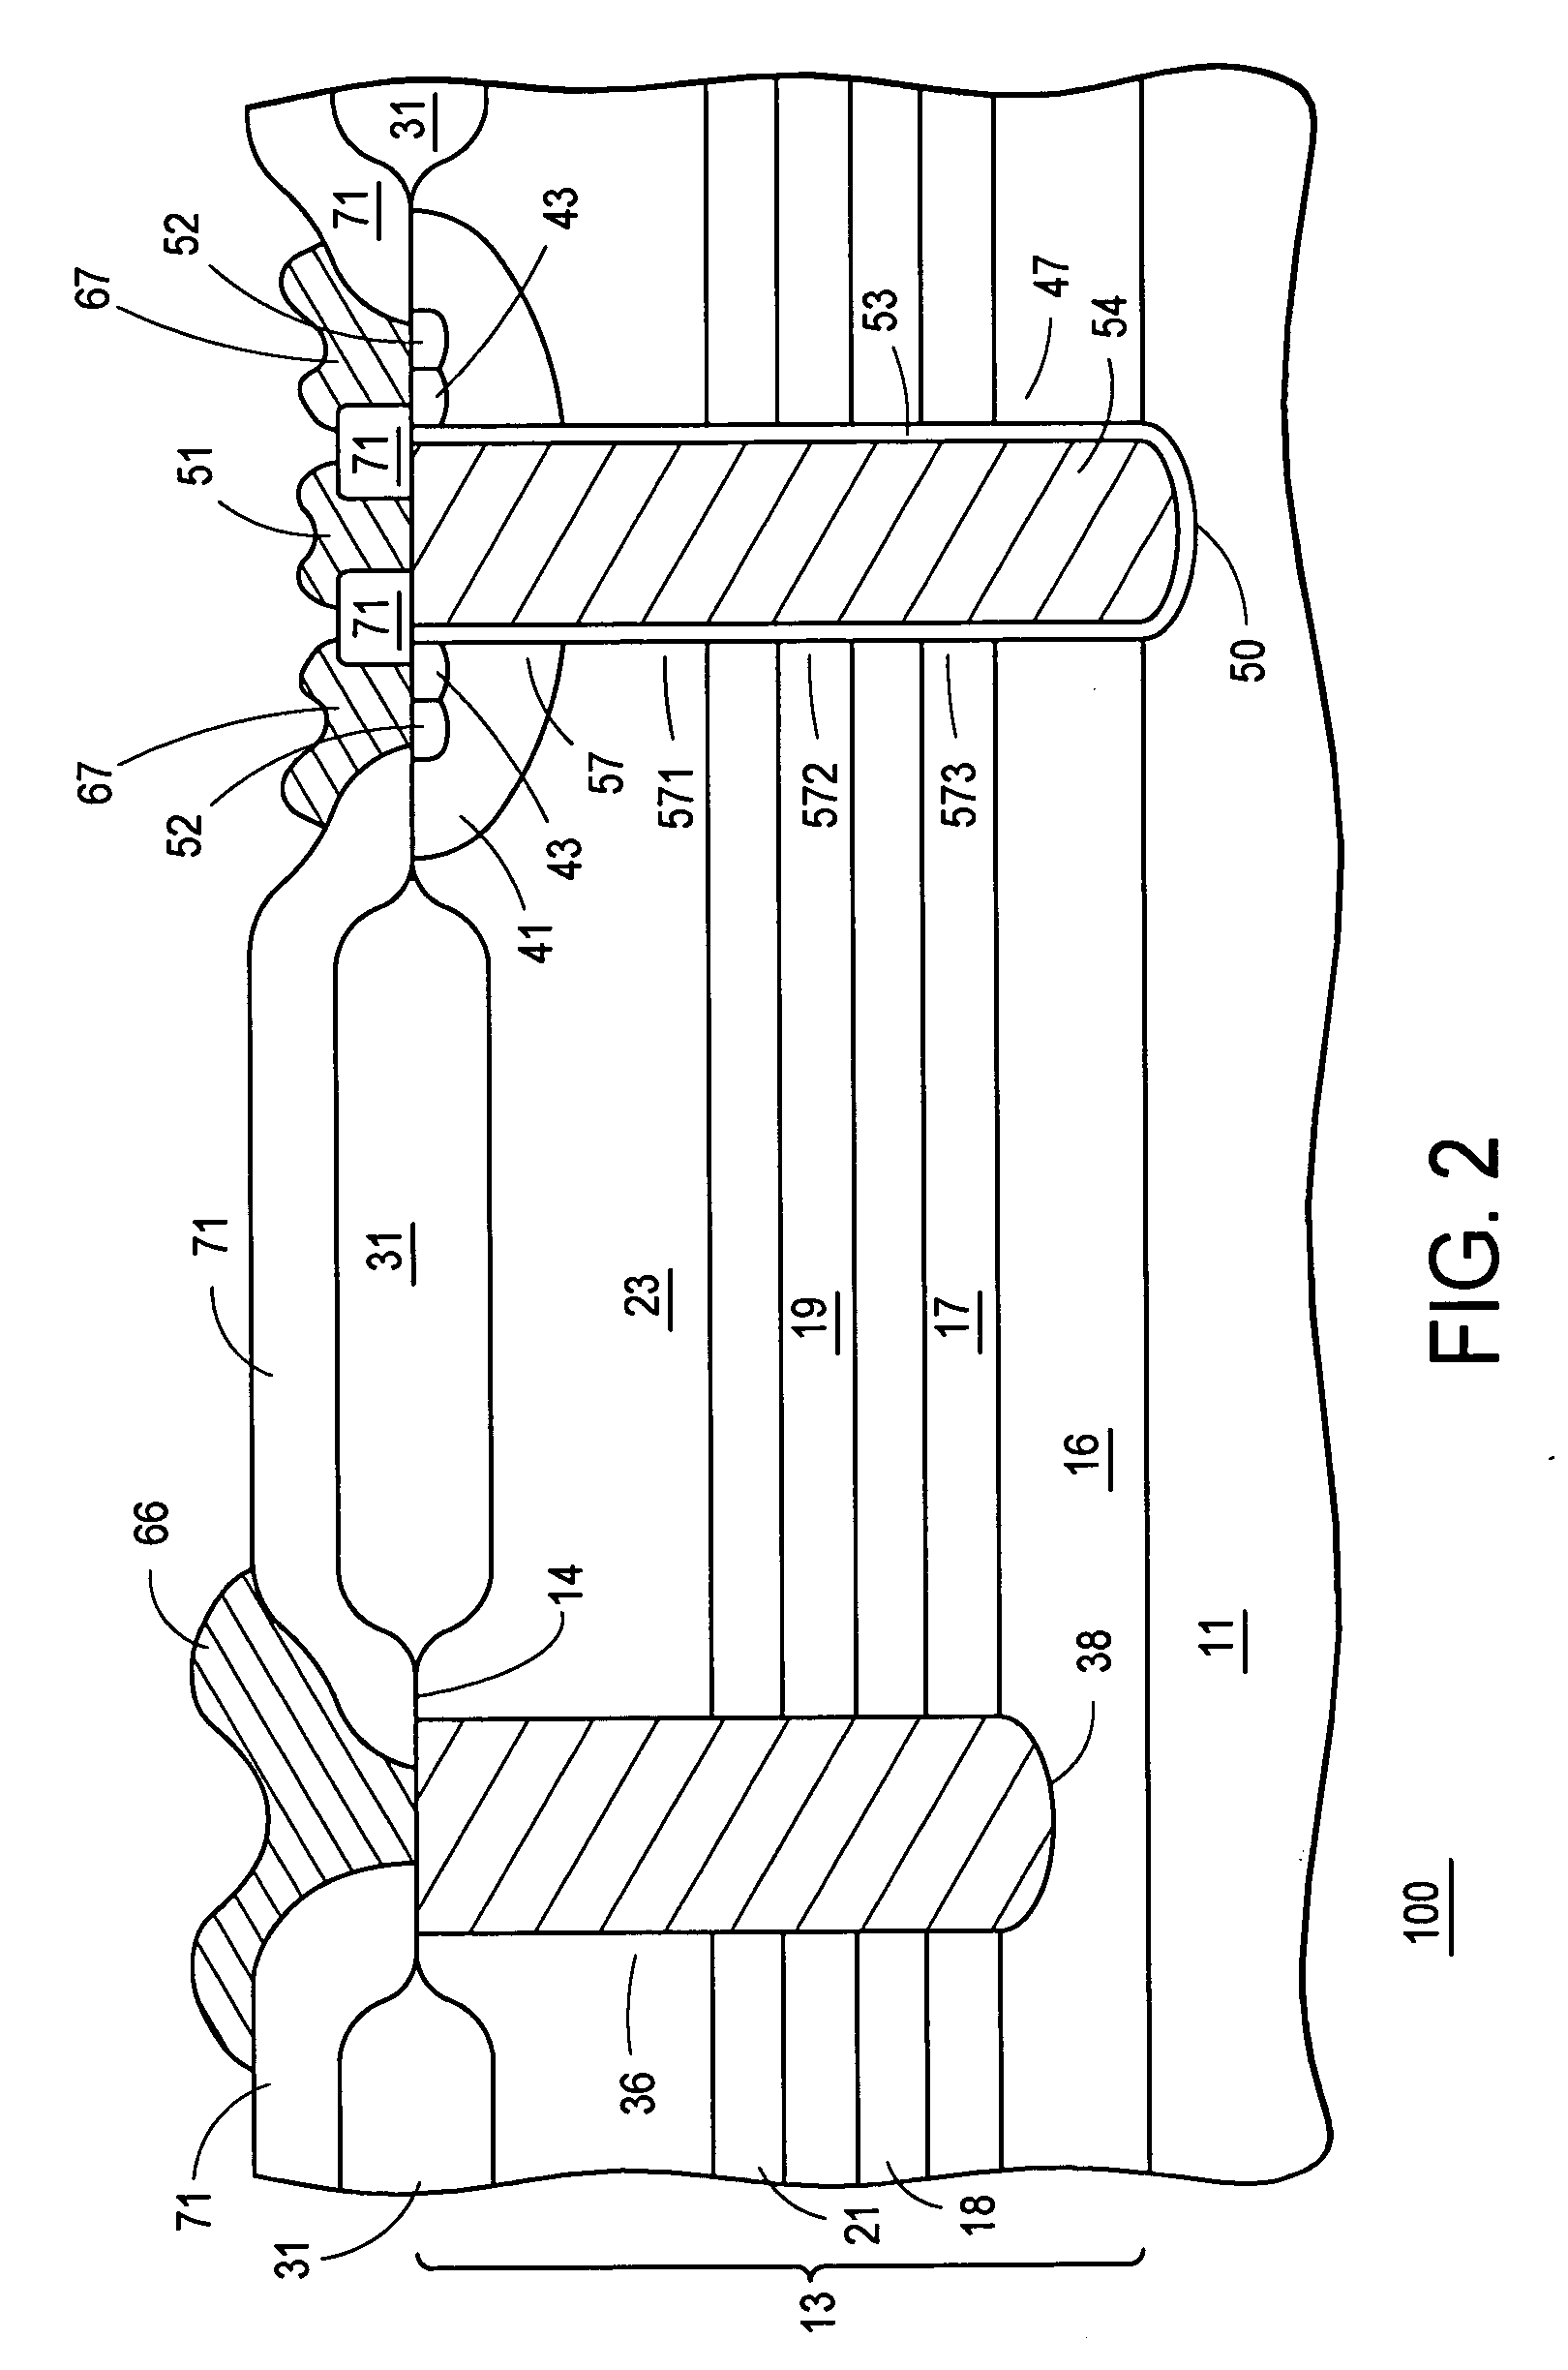 High voltage lateral FET structure with improved on resistance performance